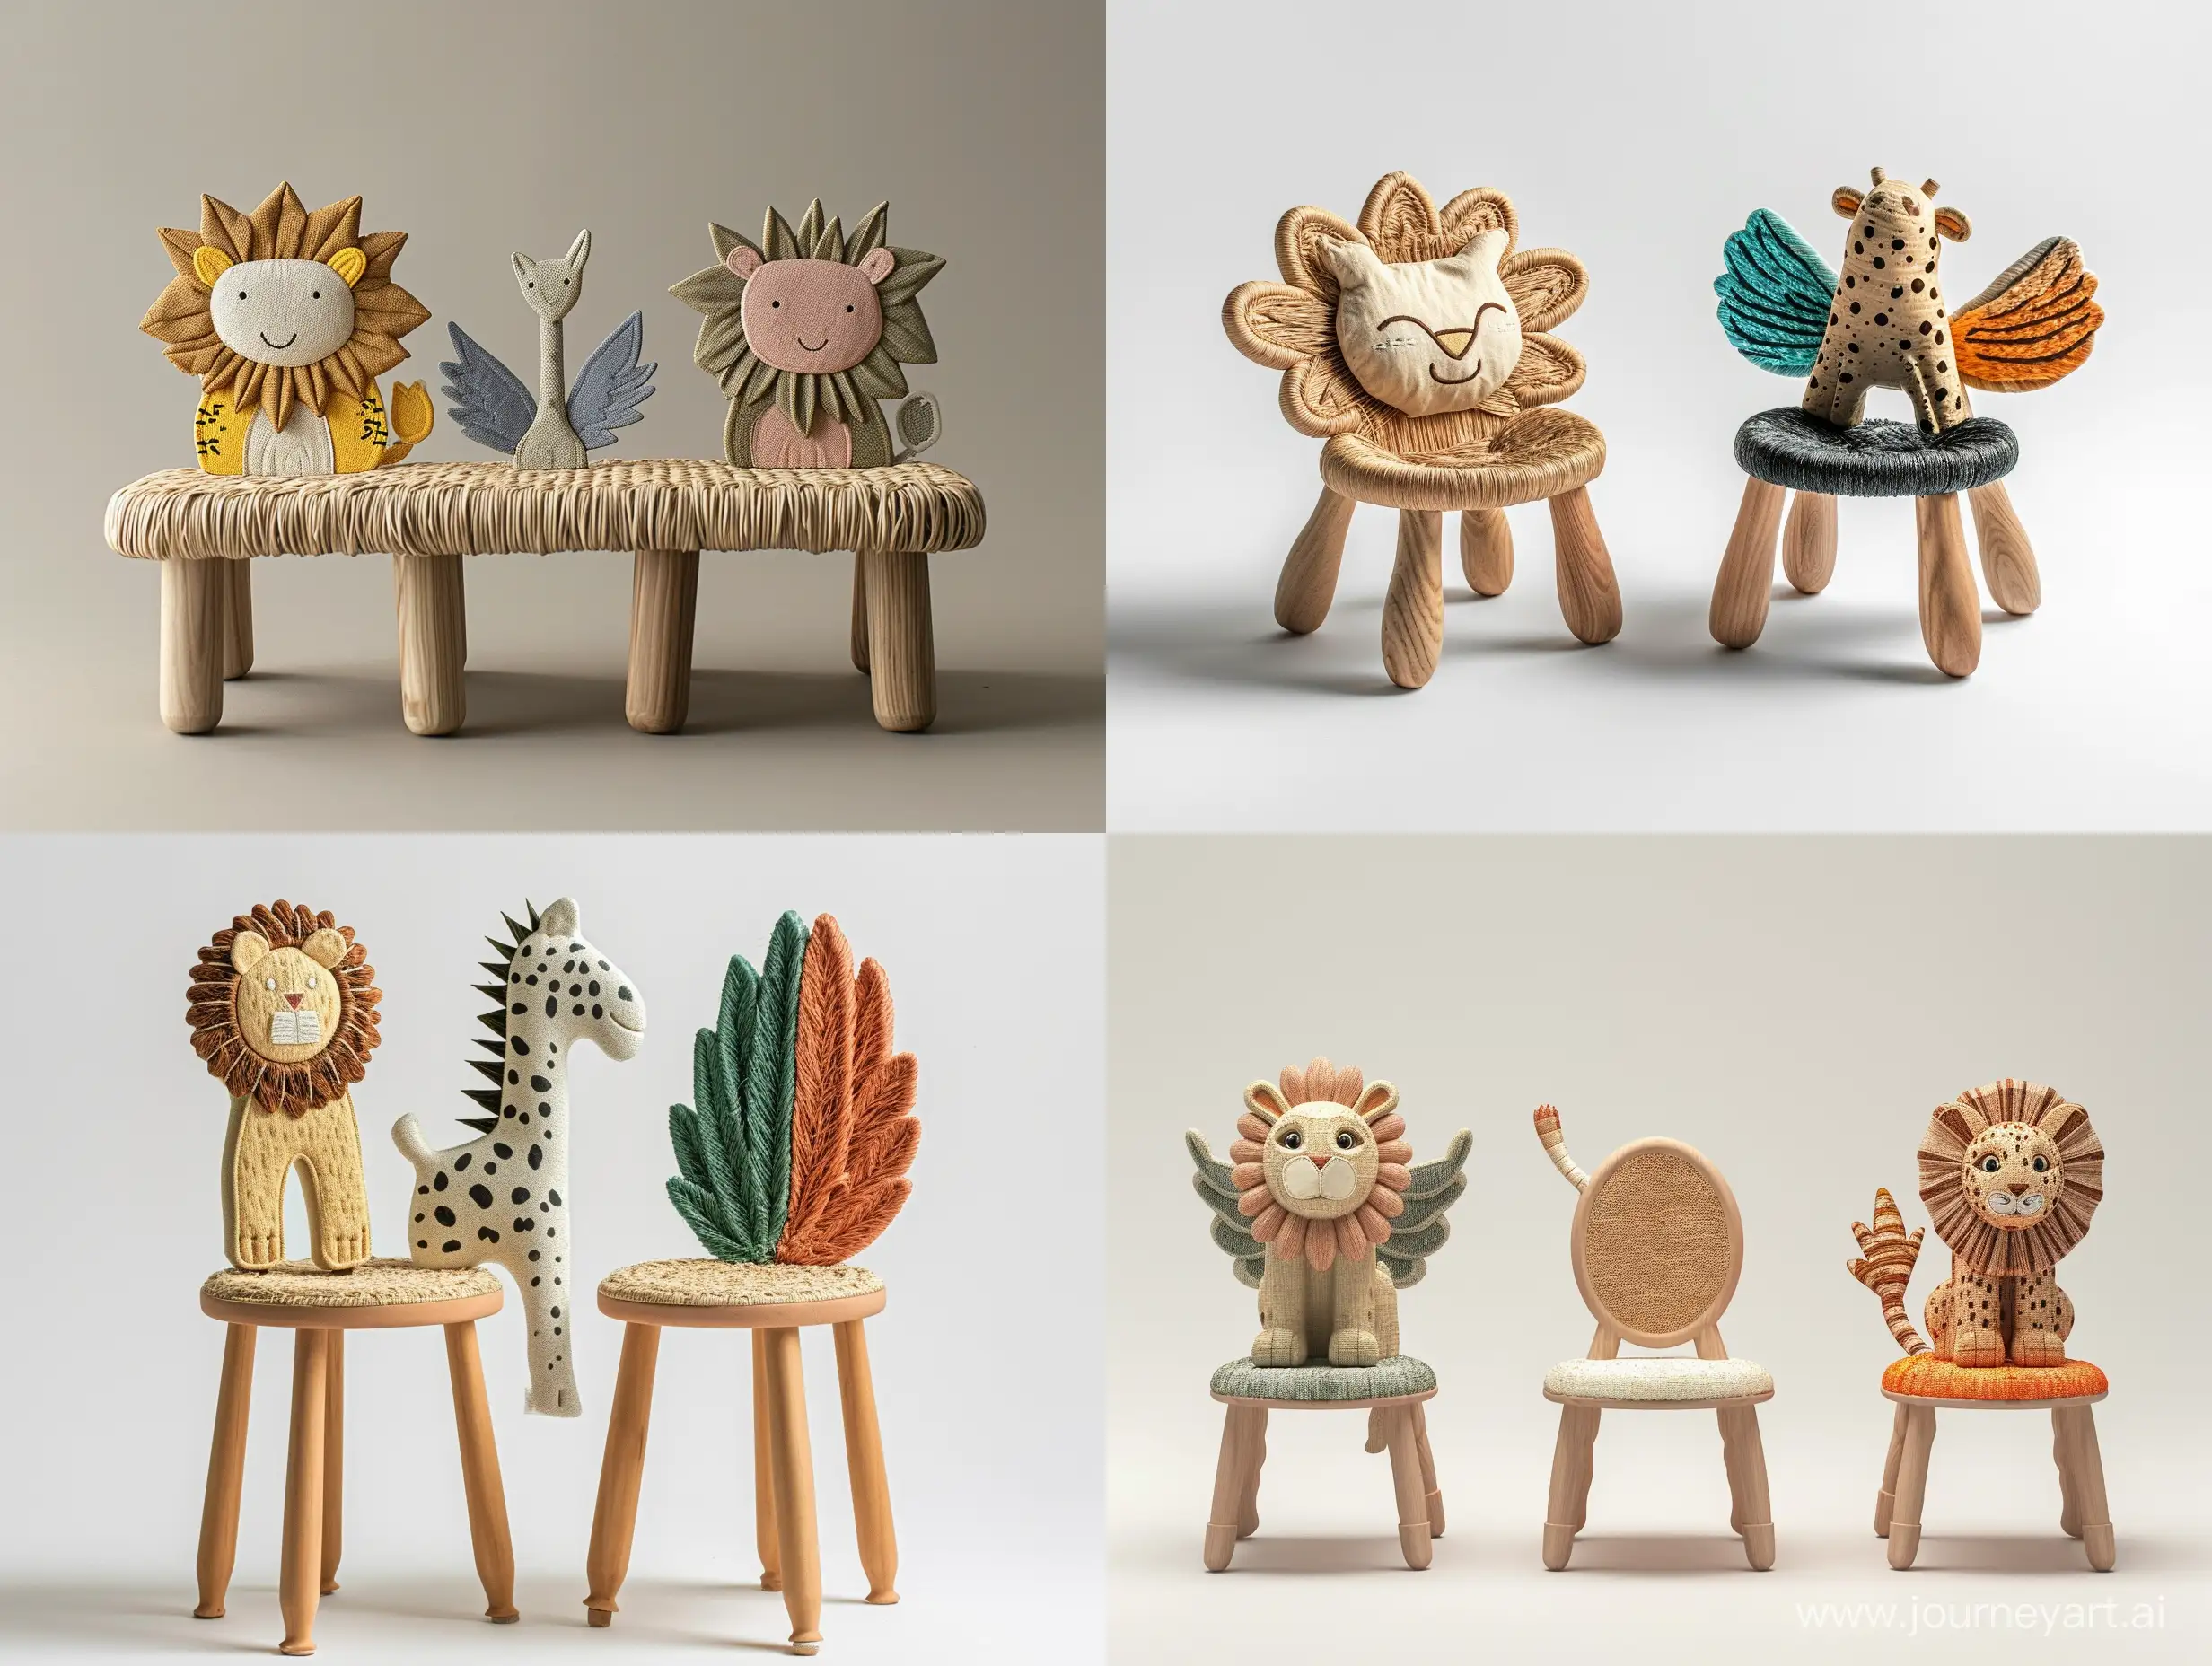 EcoFriendly-Childrens-Safari-Animal-Chair-Sustainable-and-Educational-Design